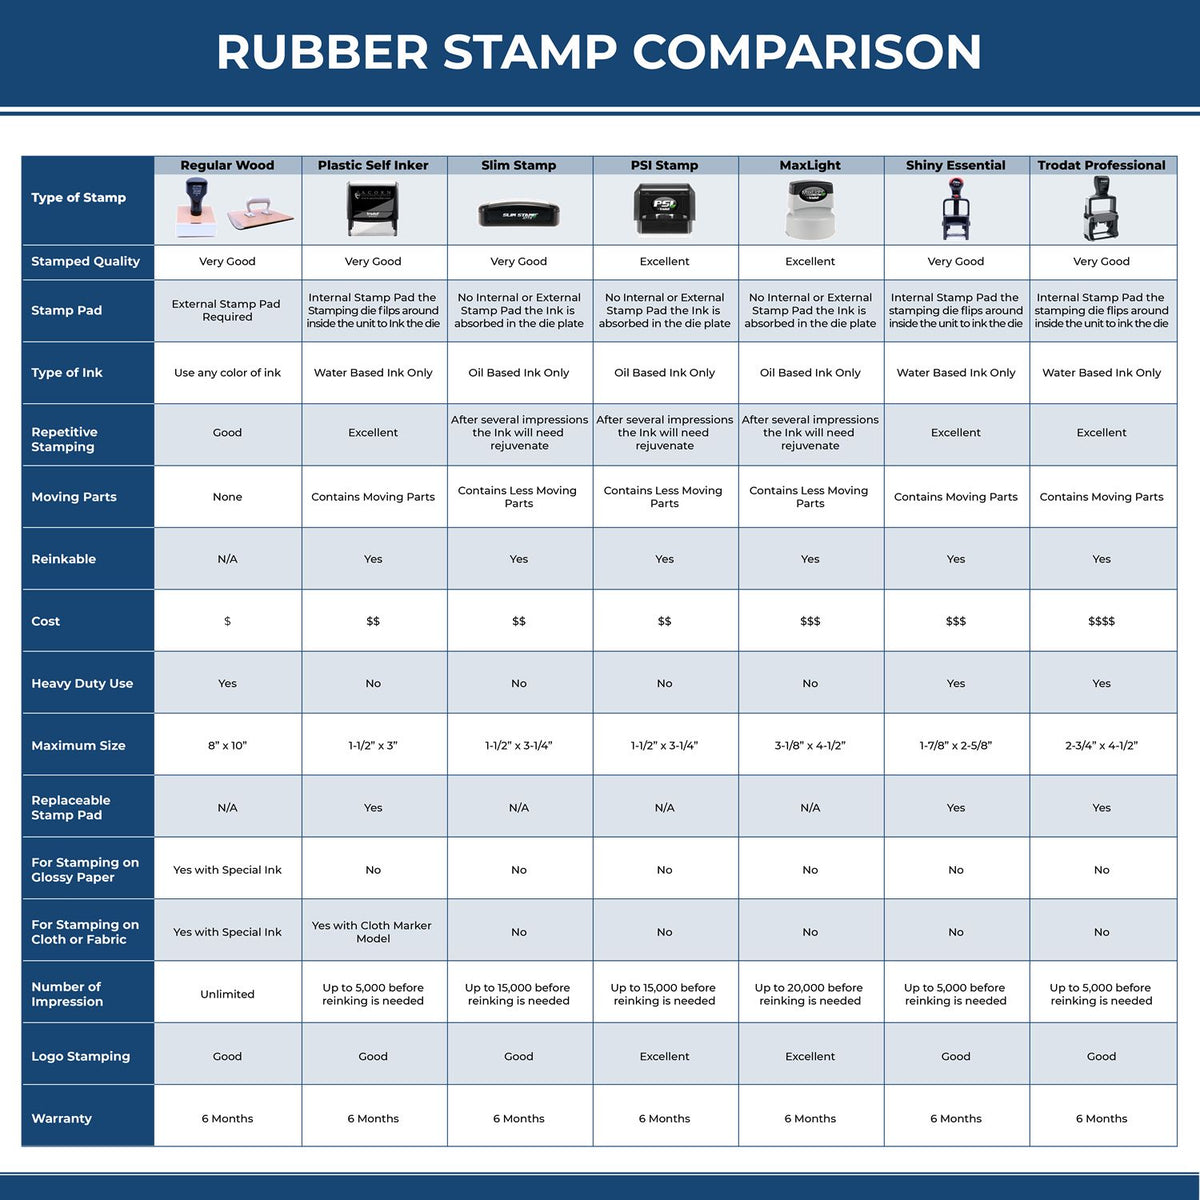 A comparison chart for the different types of mount models available for the Wooden Handle Delaware State Seal Notary Public Stamp.